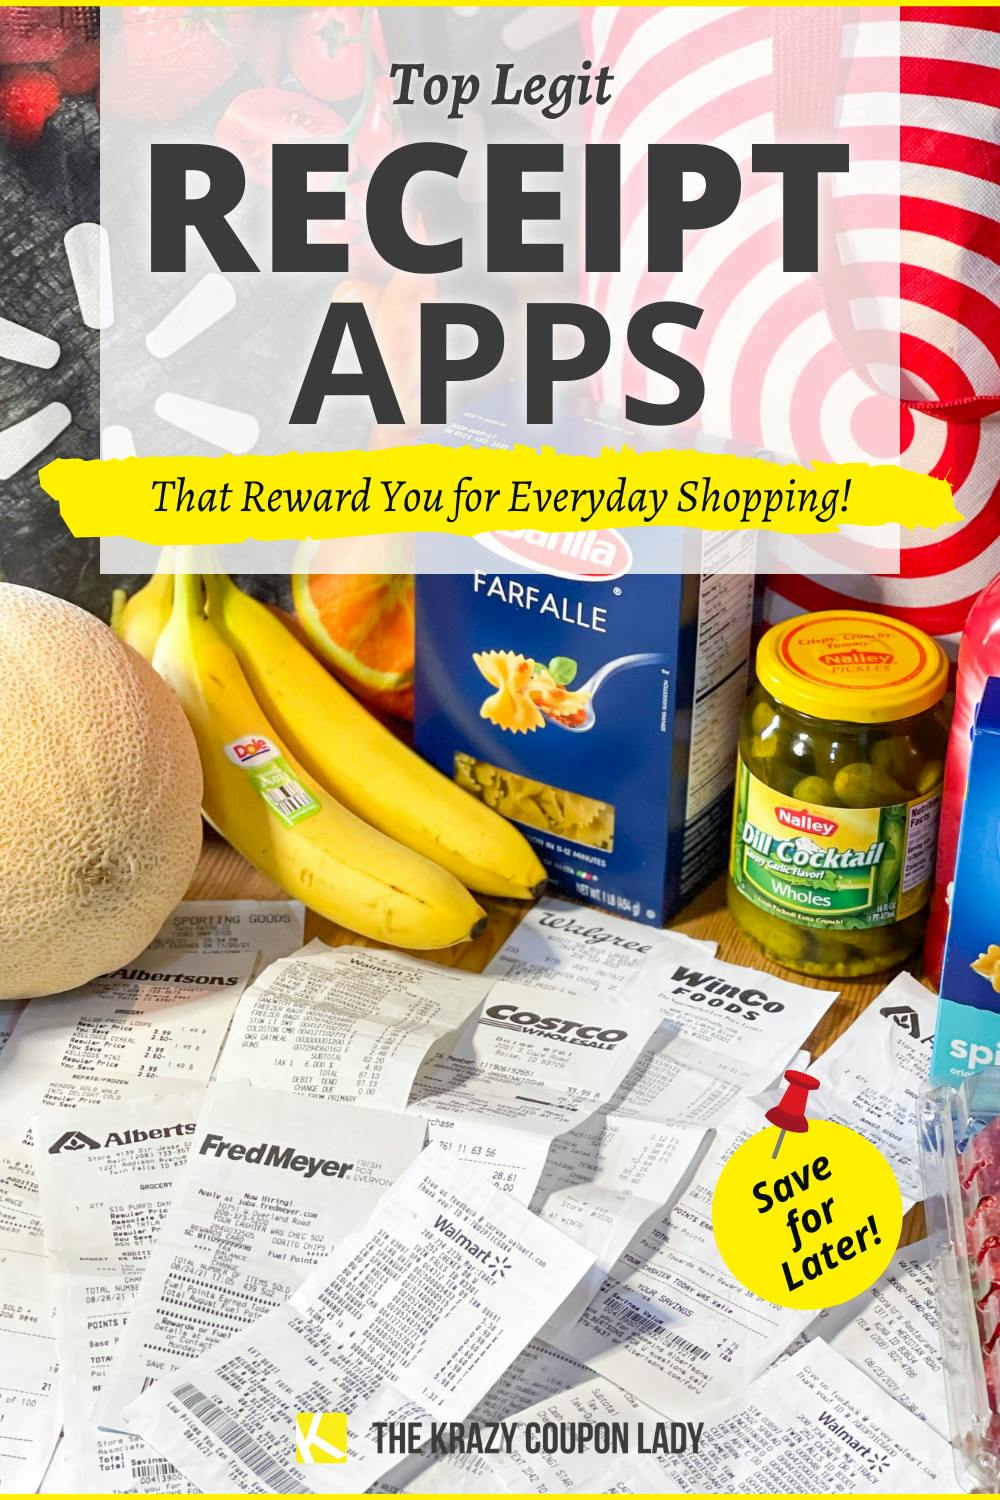 14 Receipt Apps That Reward You for Everyday Shopping